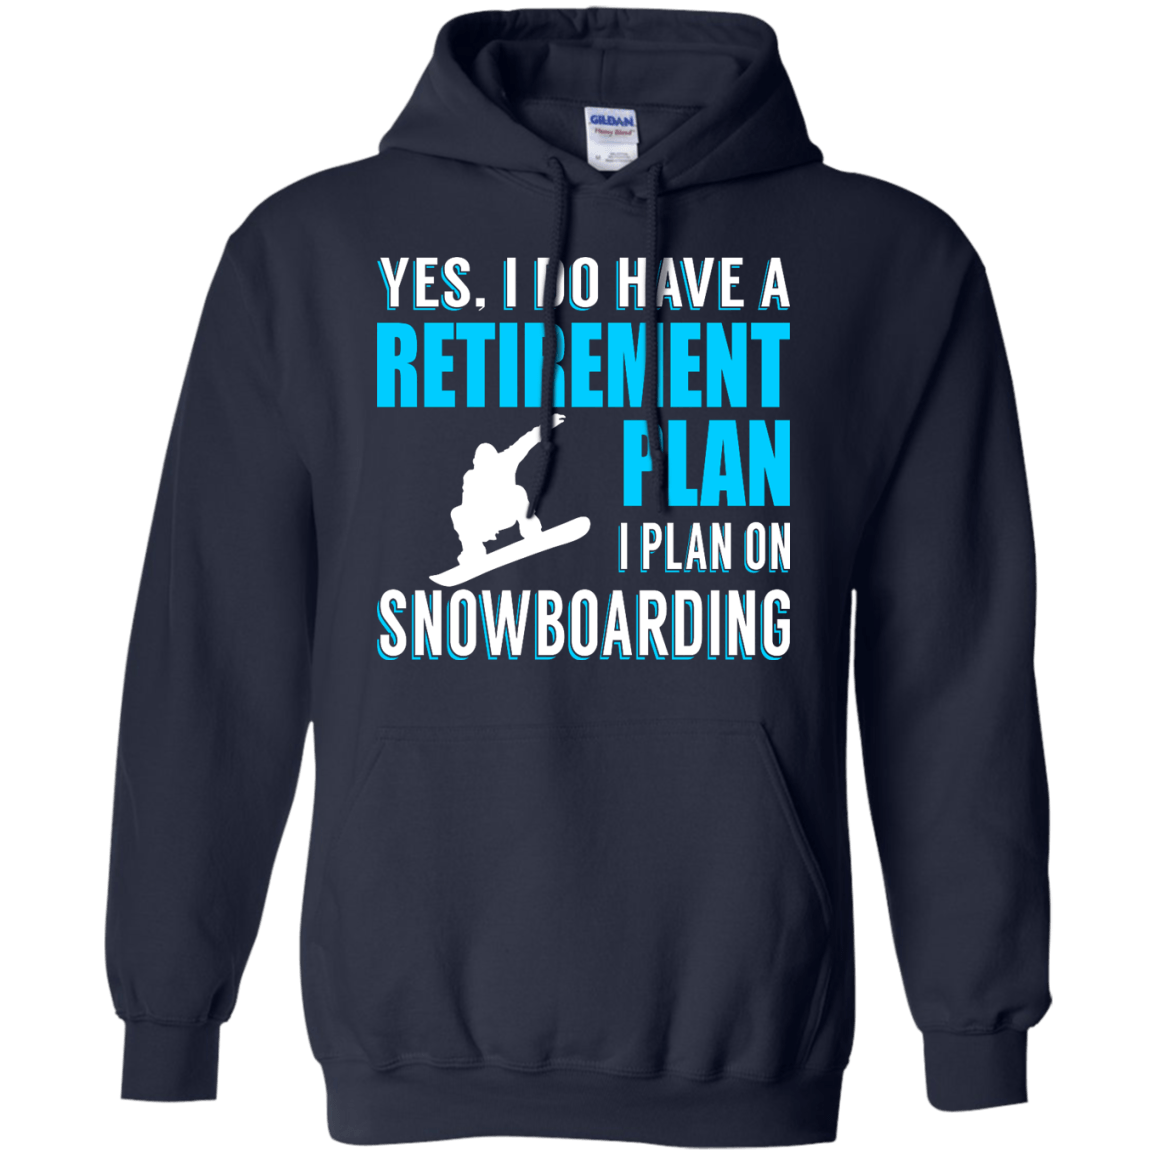 Yes, I Do Have A Retirement Plan - I Plan On Snowboarding Hoodies - Powderaddicts